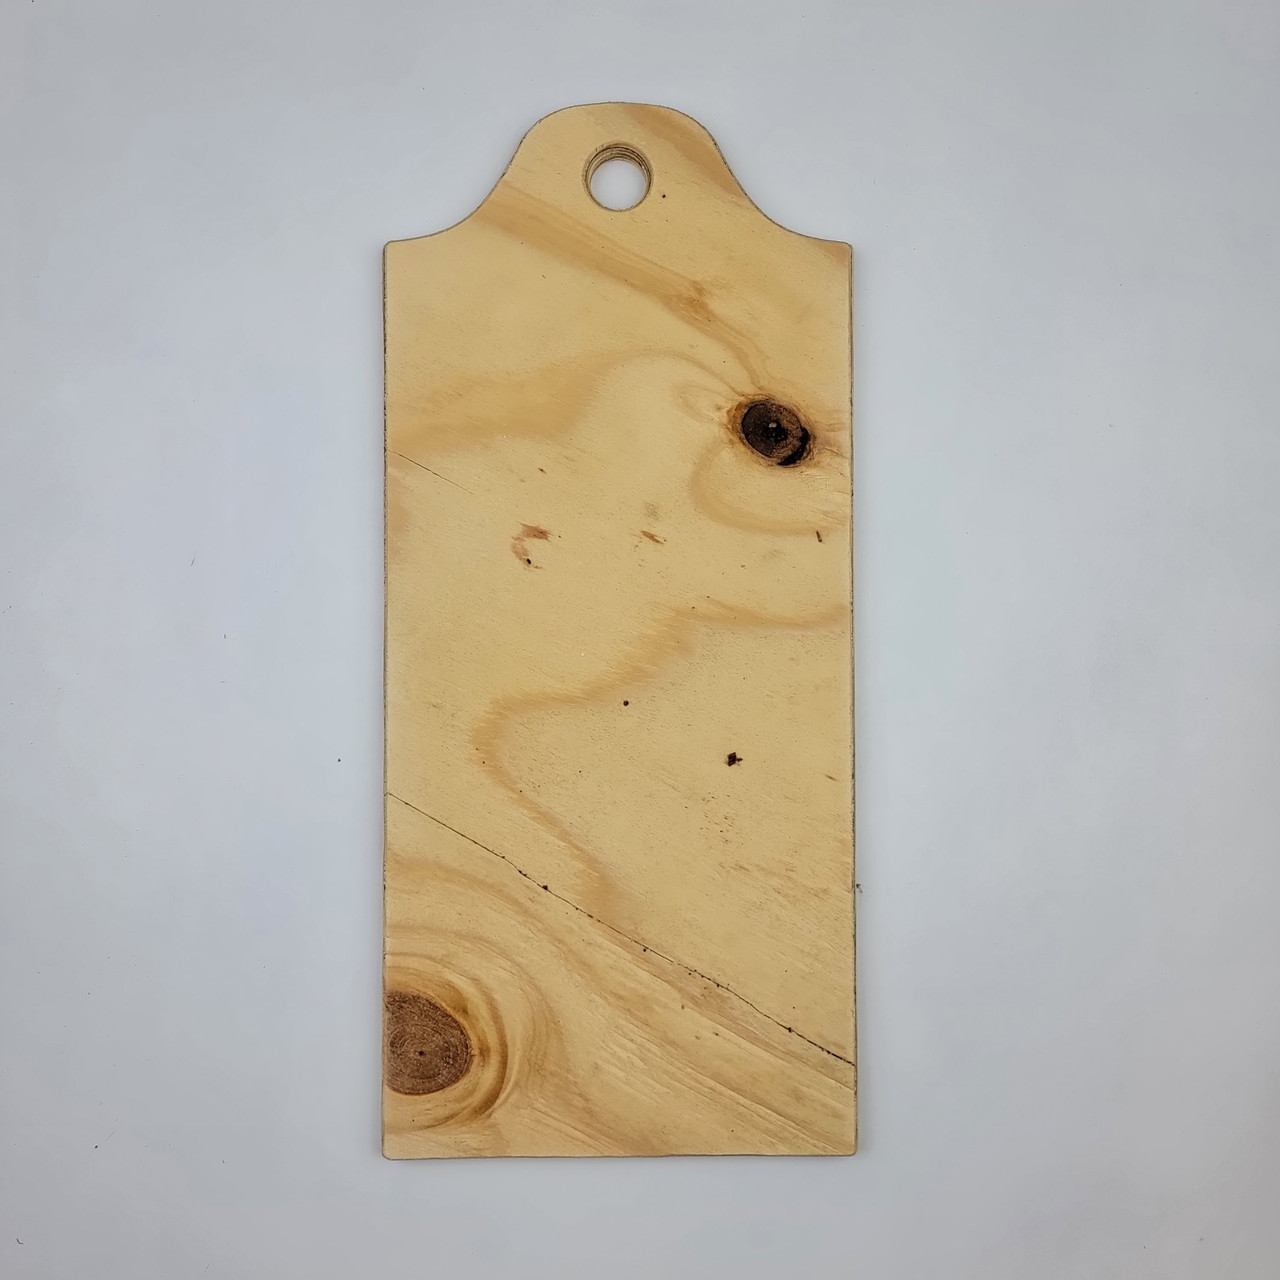 Rounded Rectangle Shape Bread Board Design, Unfinished Wood Cutout